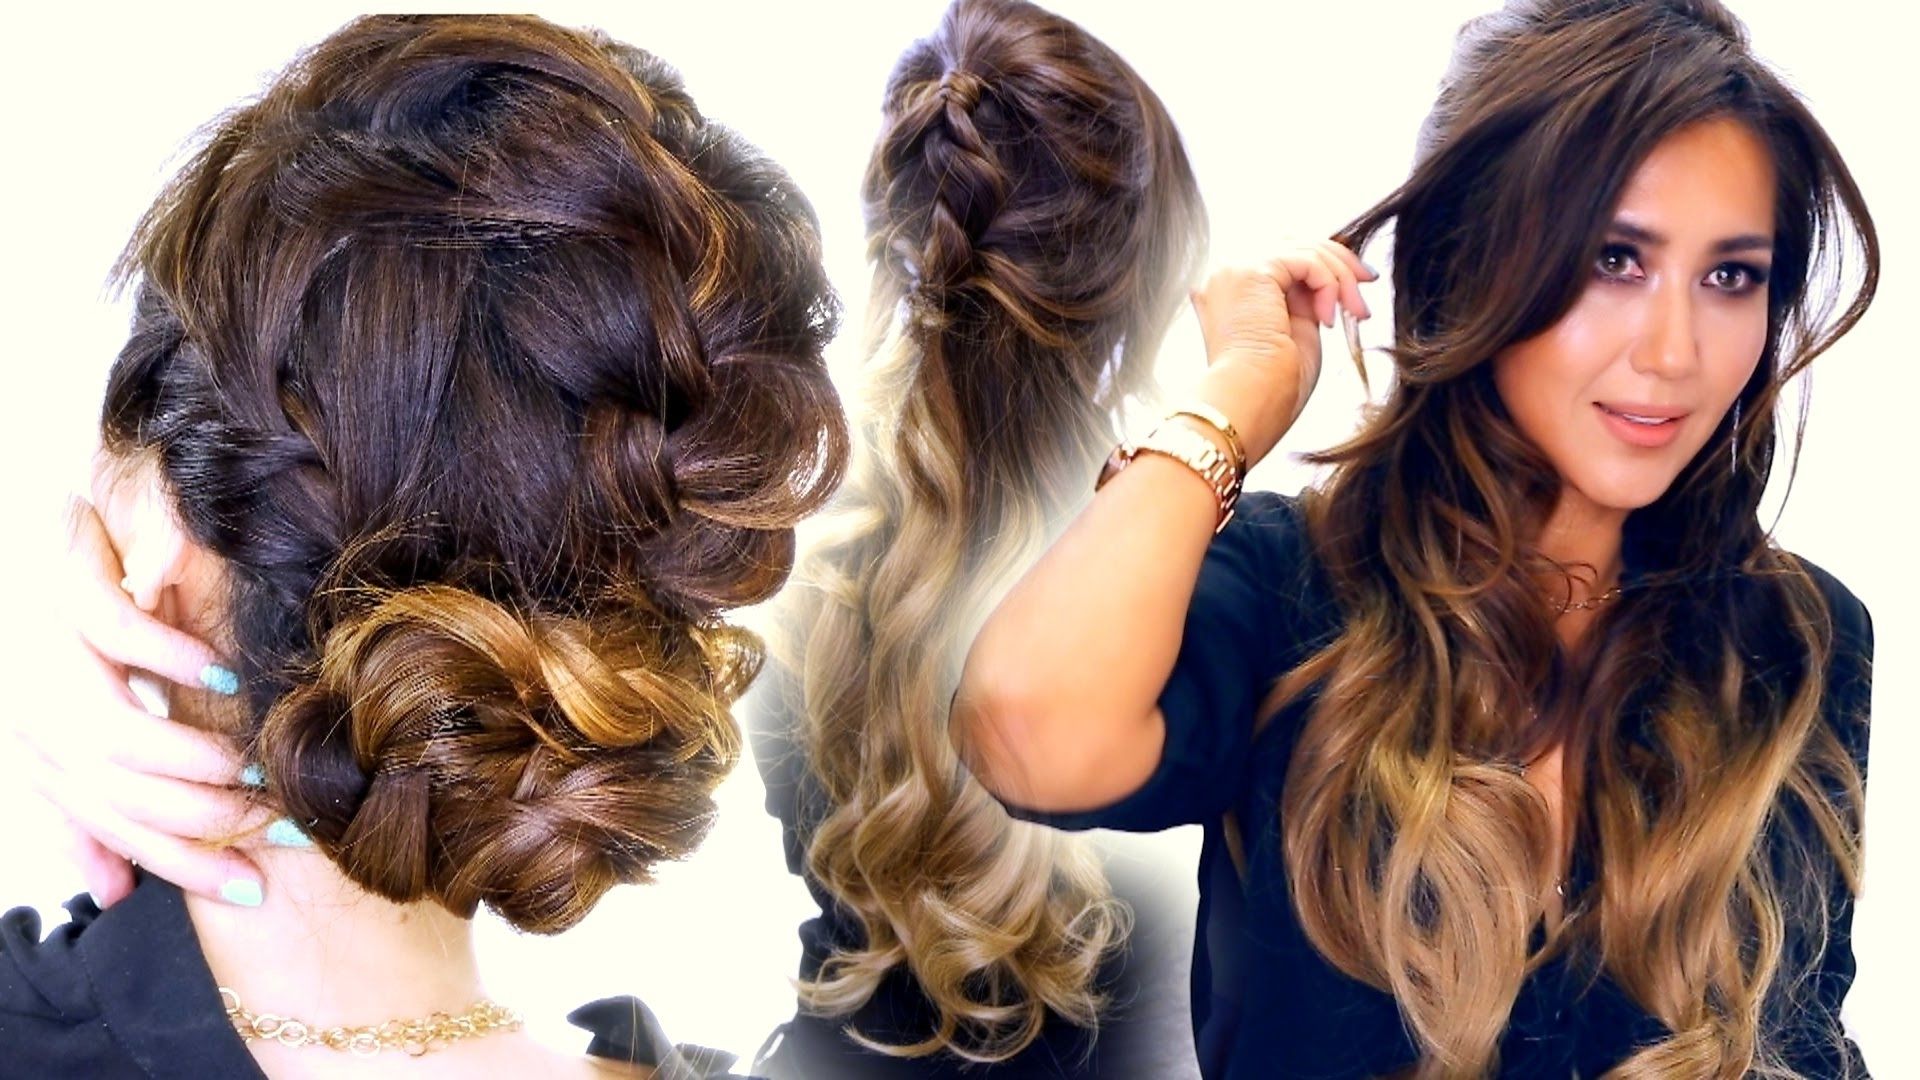 Current Braid Hairstyles To Messy Bun With 2 ☆ Summer Braid Hairstyles (View 1 of 15)